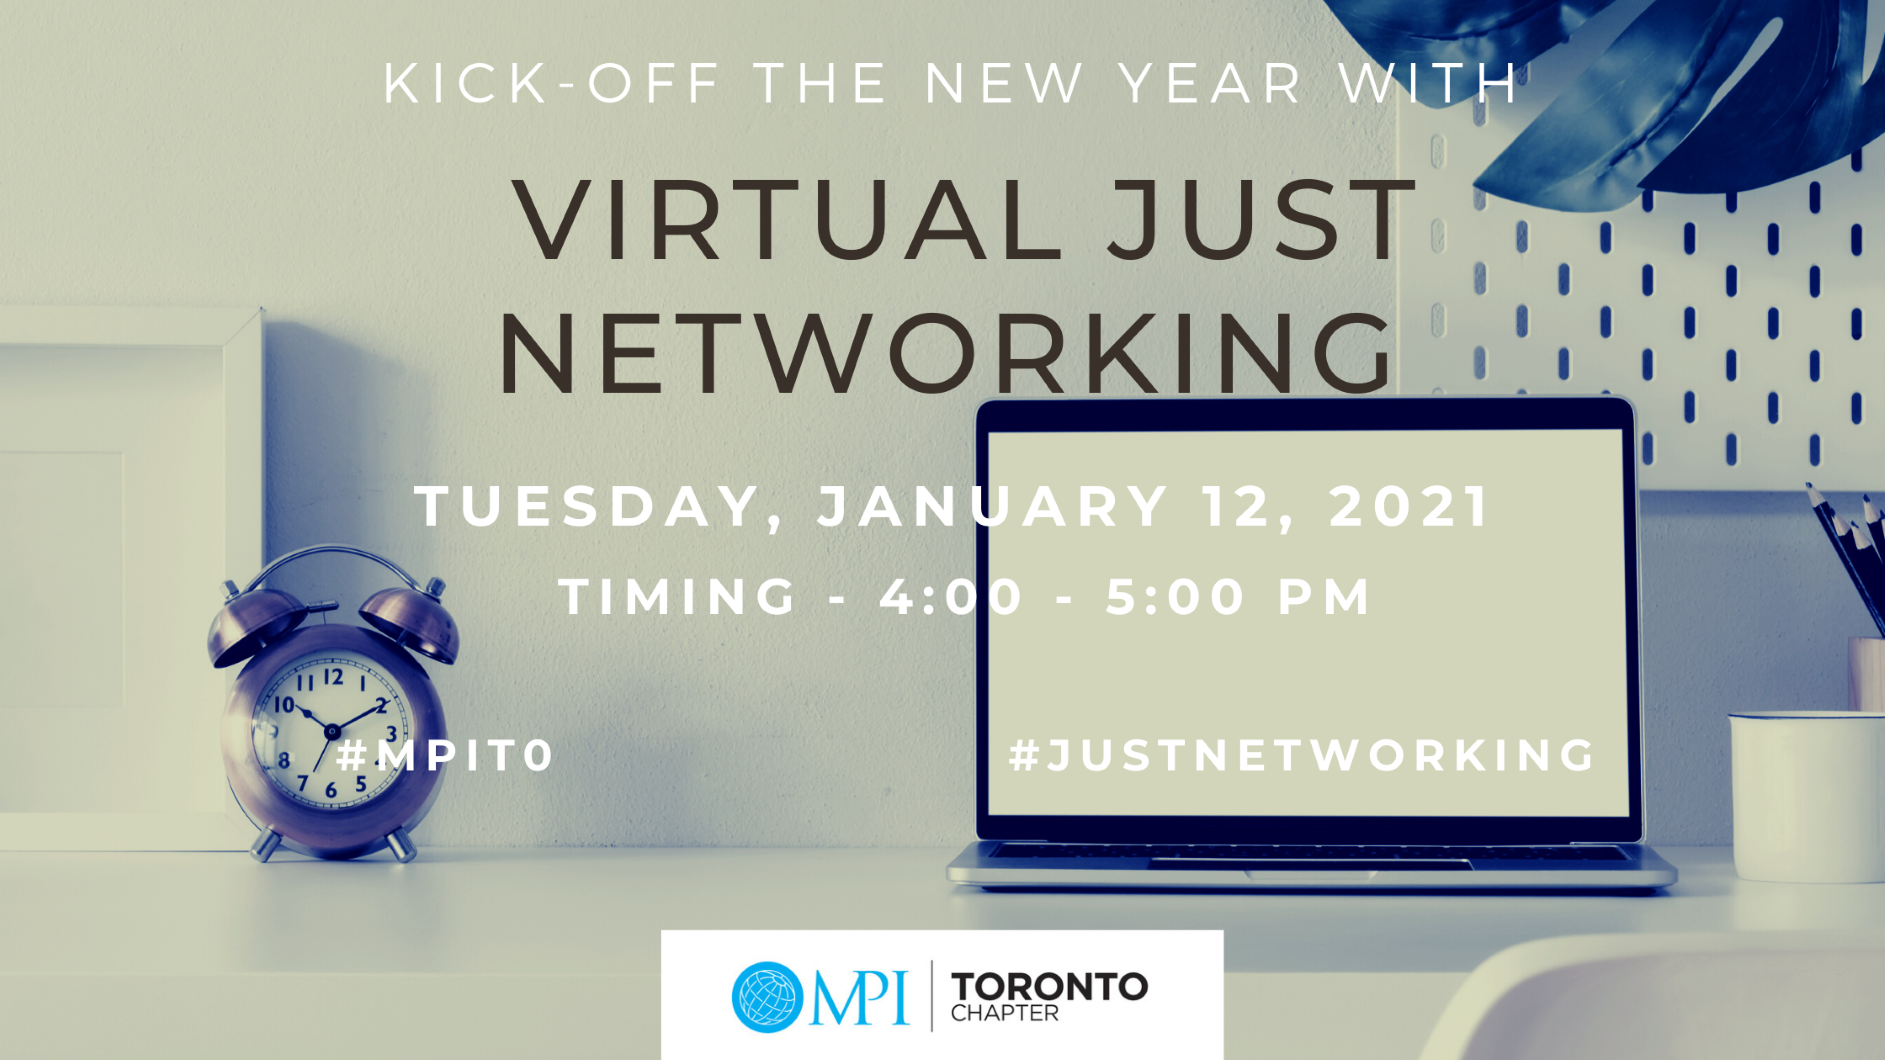 Just Networking Save the Date January 12 2021